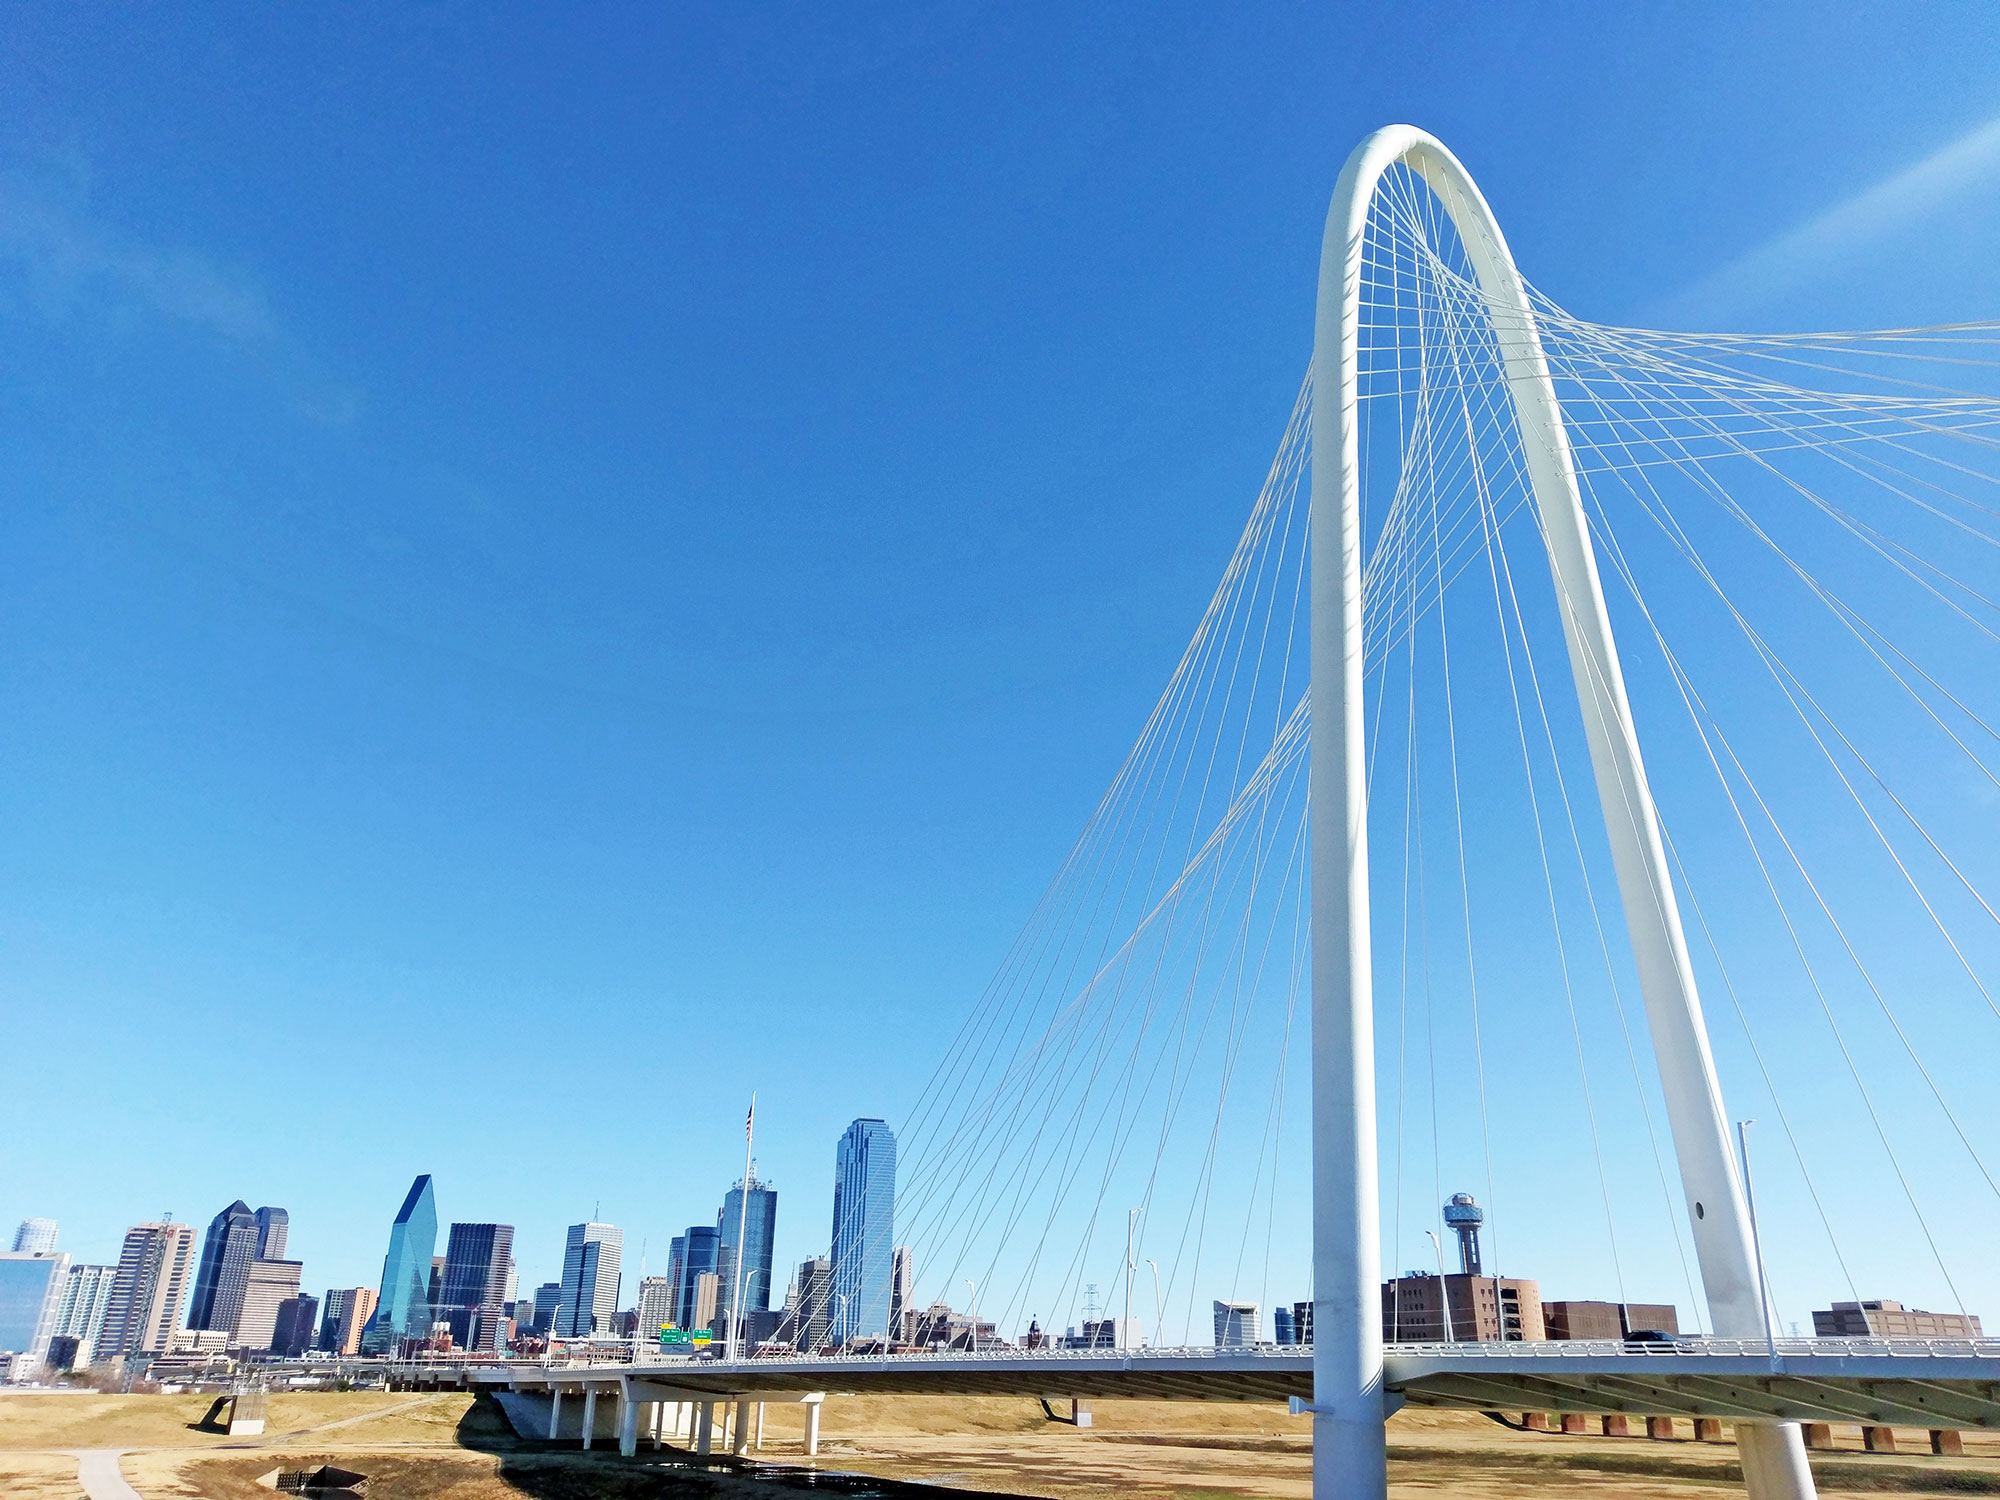 A view of downtown Dallas from the Trinity River